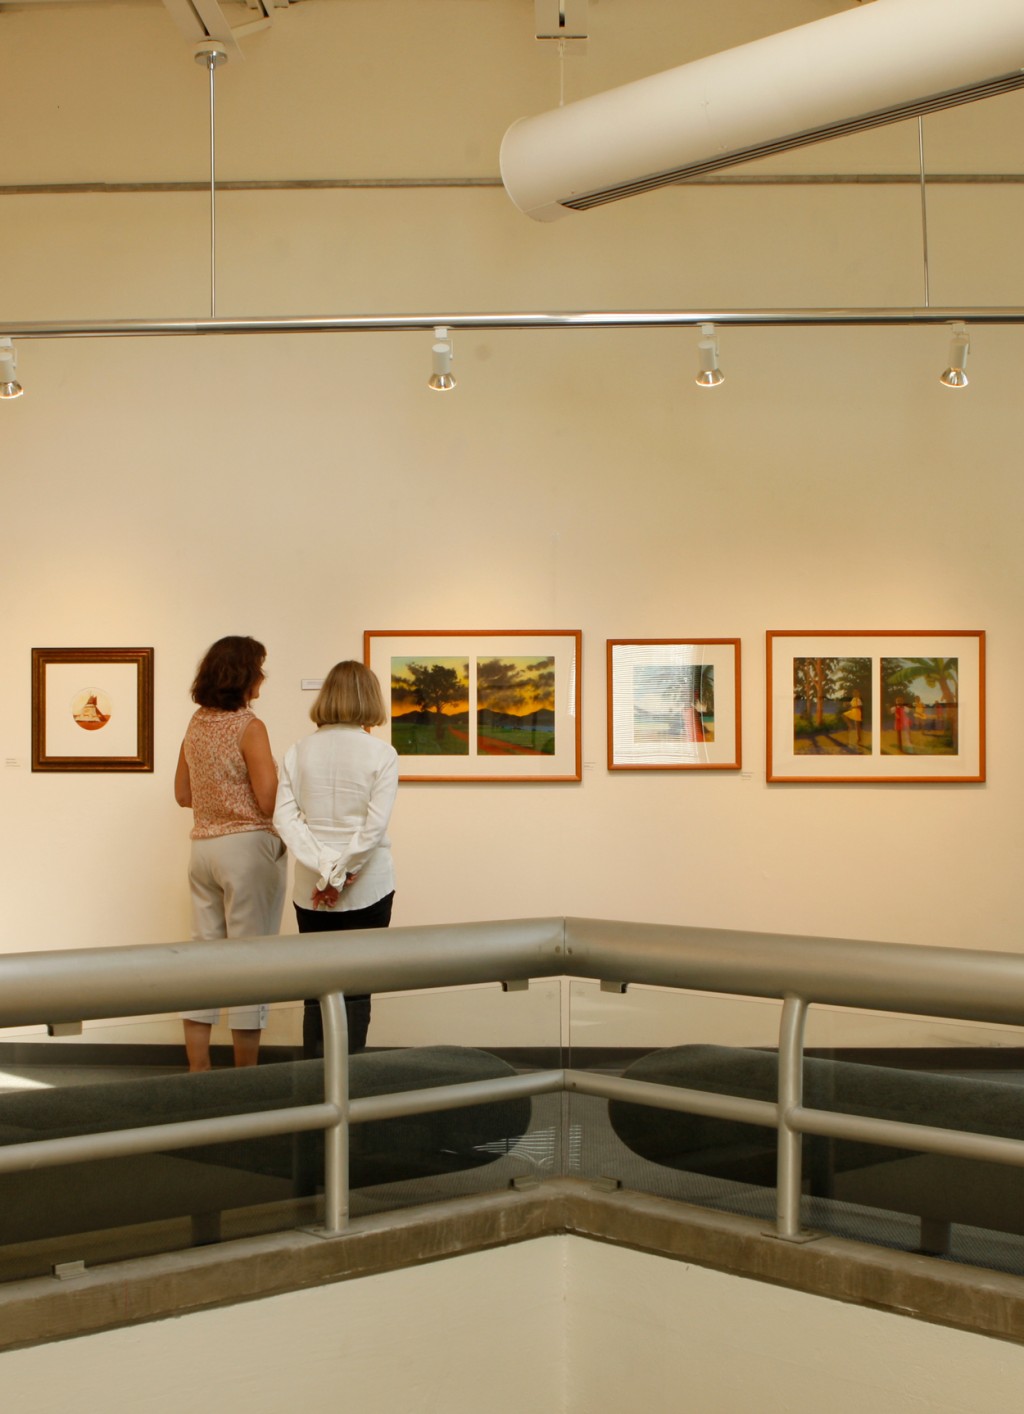 Two women look at a row of framed paintings hanging on a white wall in the Portland Campus art gallery